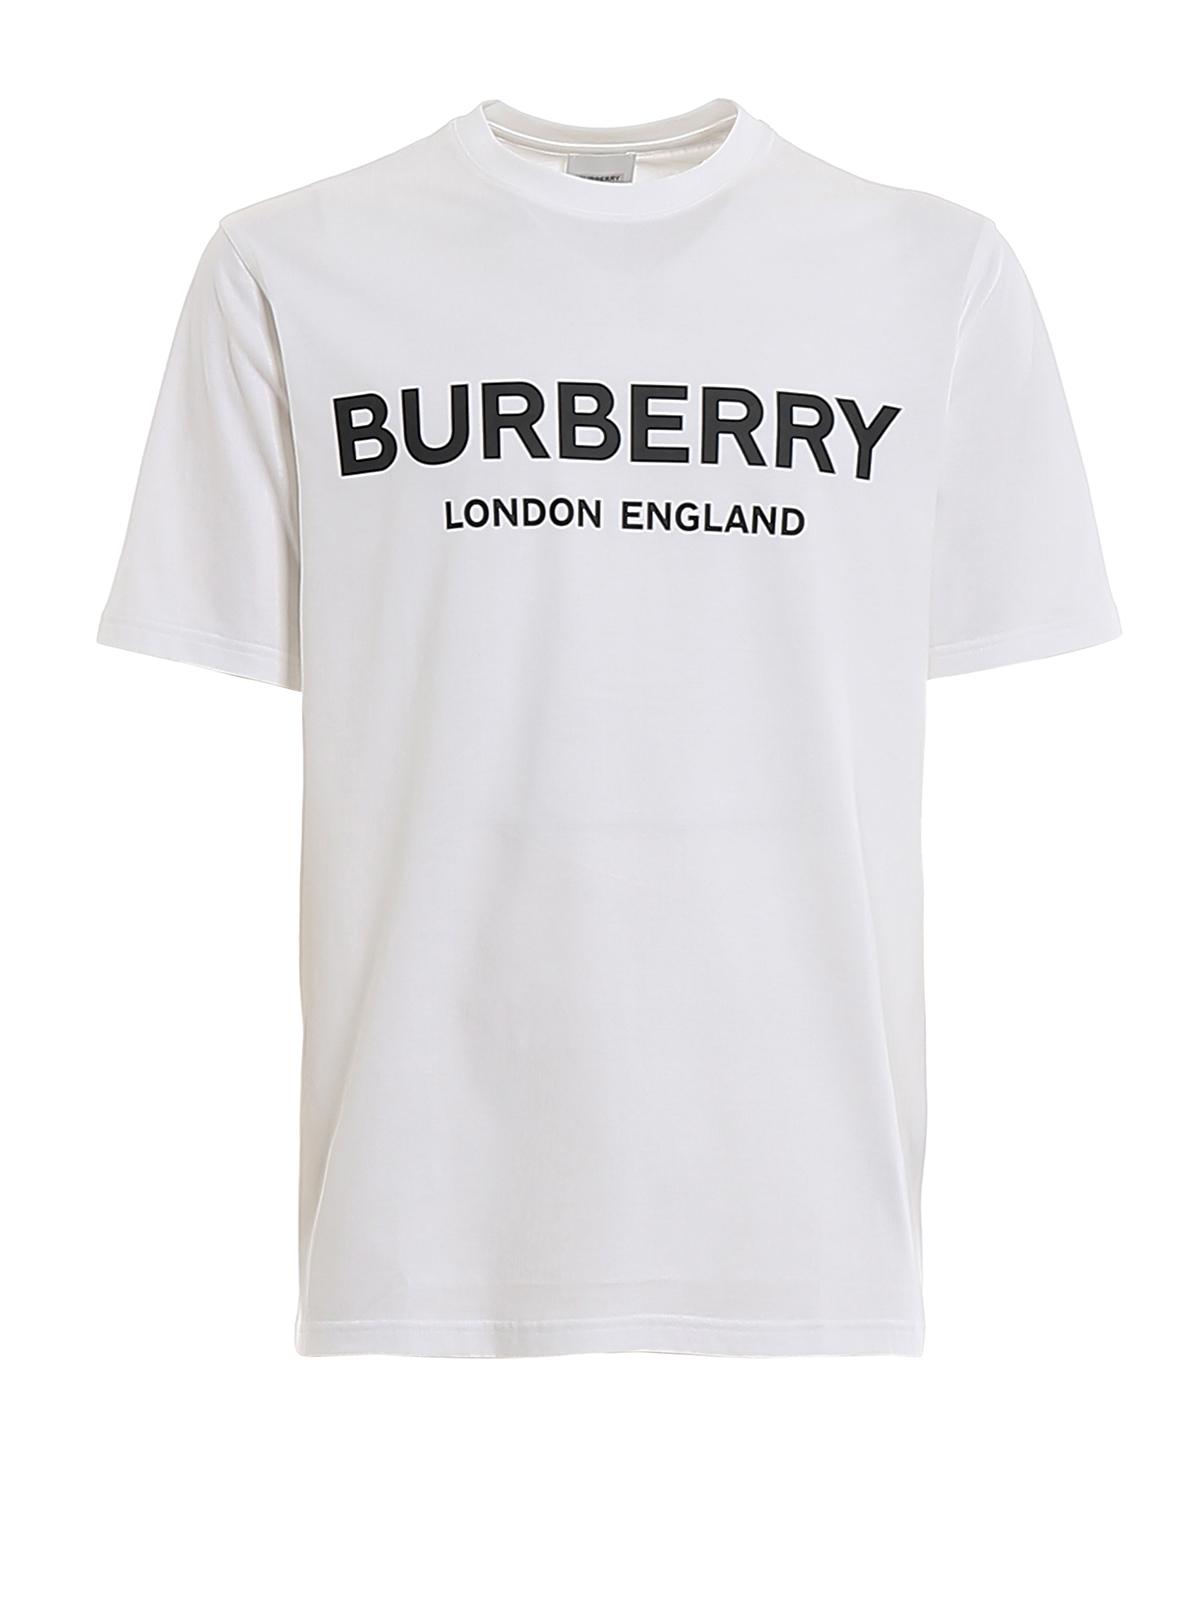 Burberry Letchford Logo Printed Jersey T-shirt in White for Men - Lyst